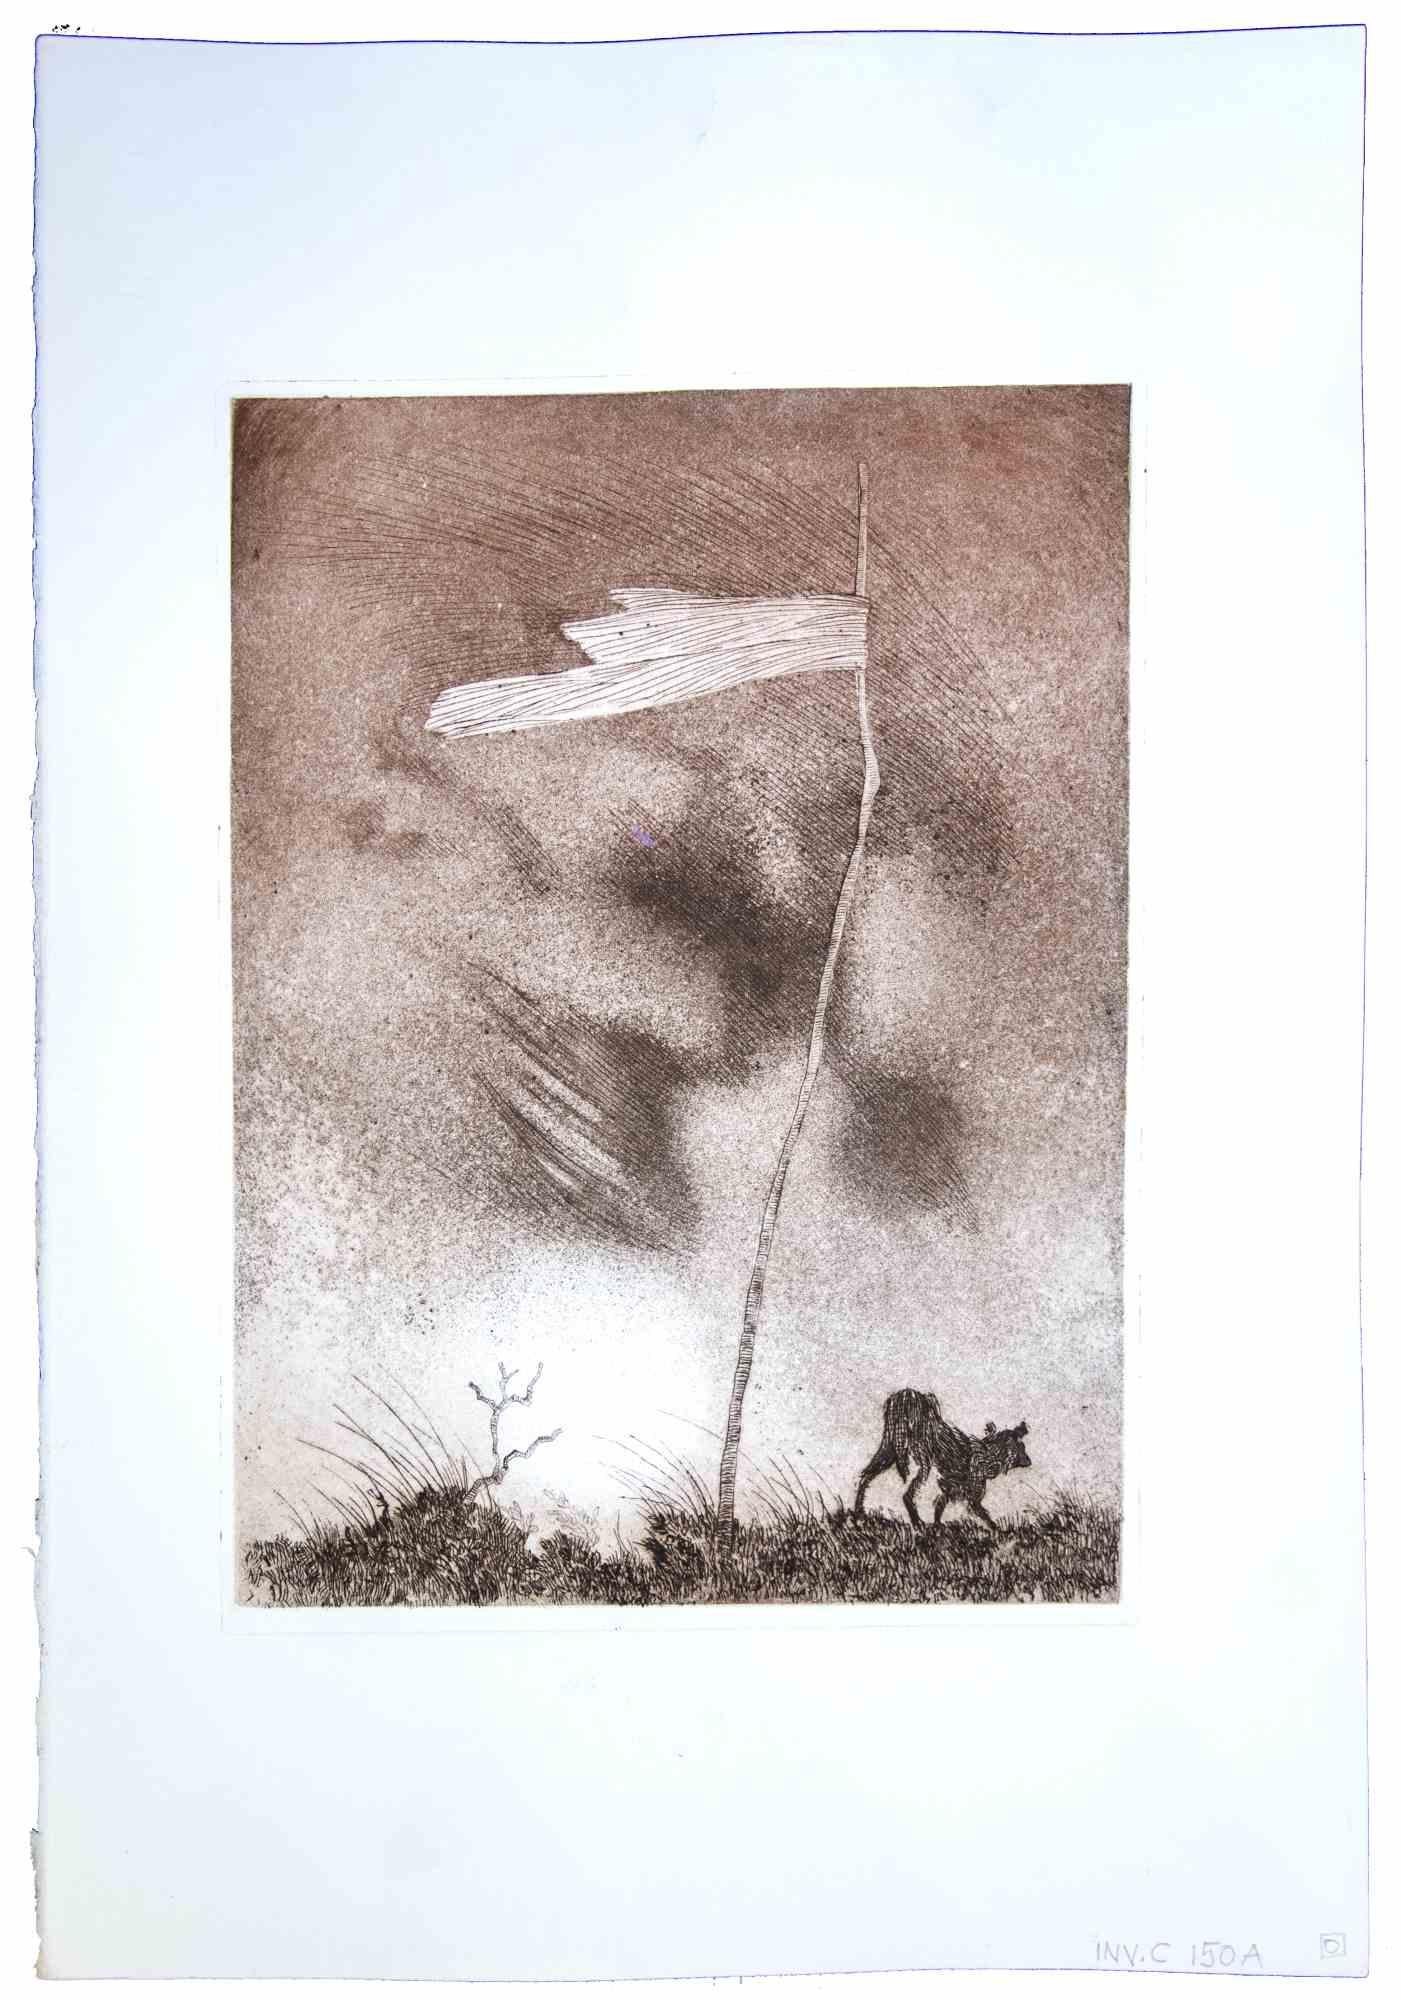 Lonely Flag - Original Etching by Leo Guida - 1970